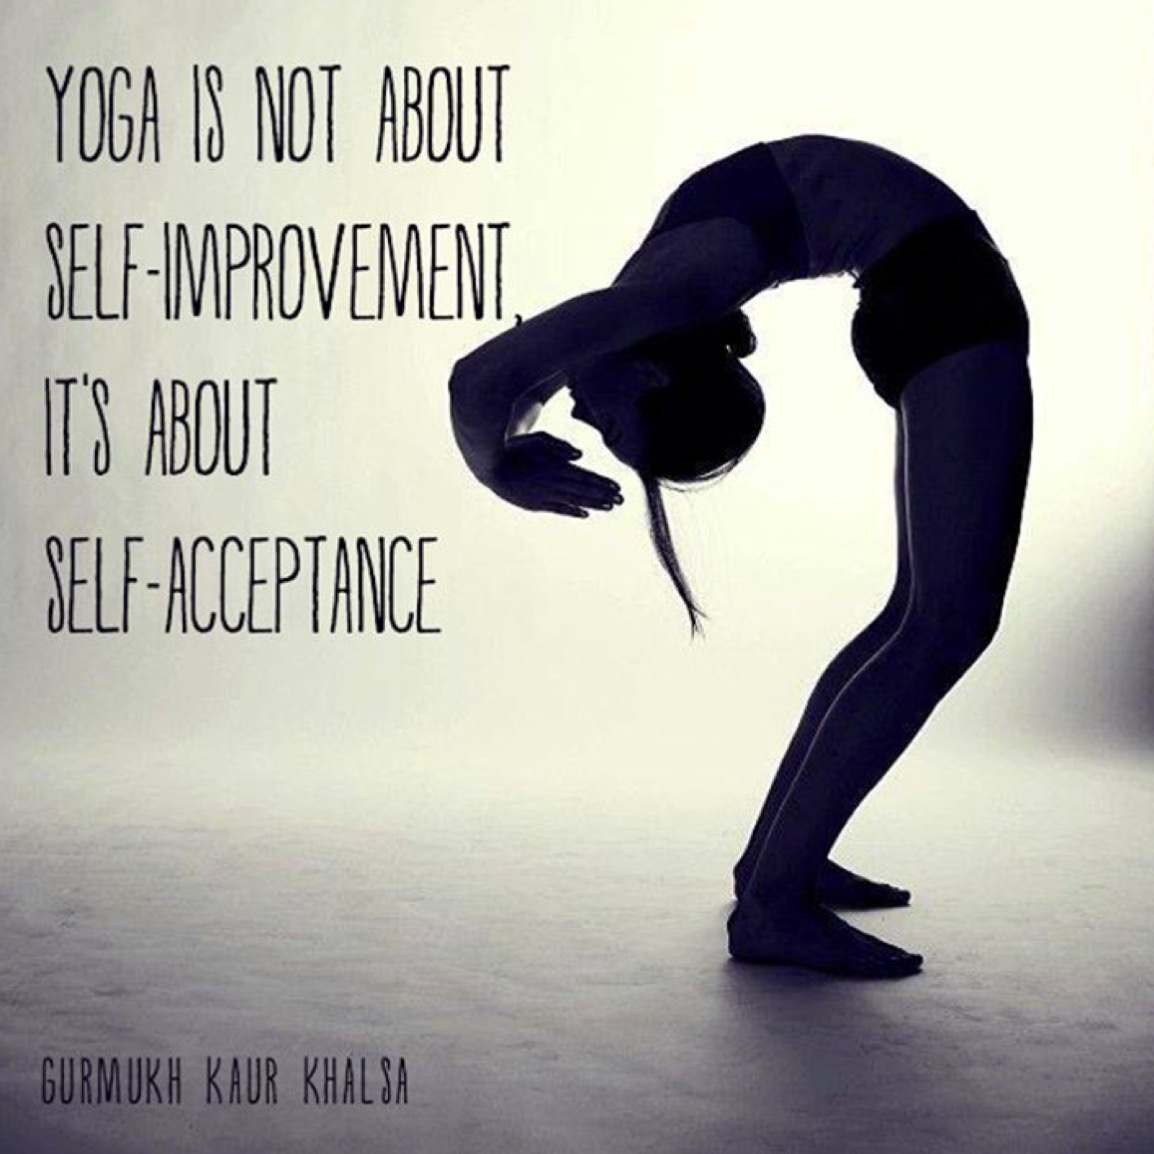 Most Inspirational Yoga Quotes for the Mind, Body and Soul – InspiraQuotes